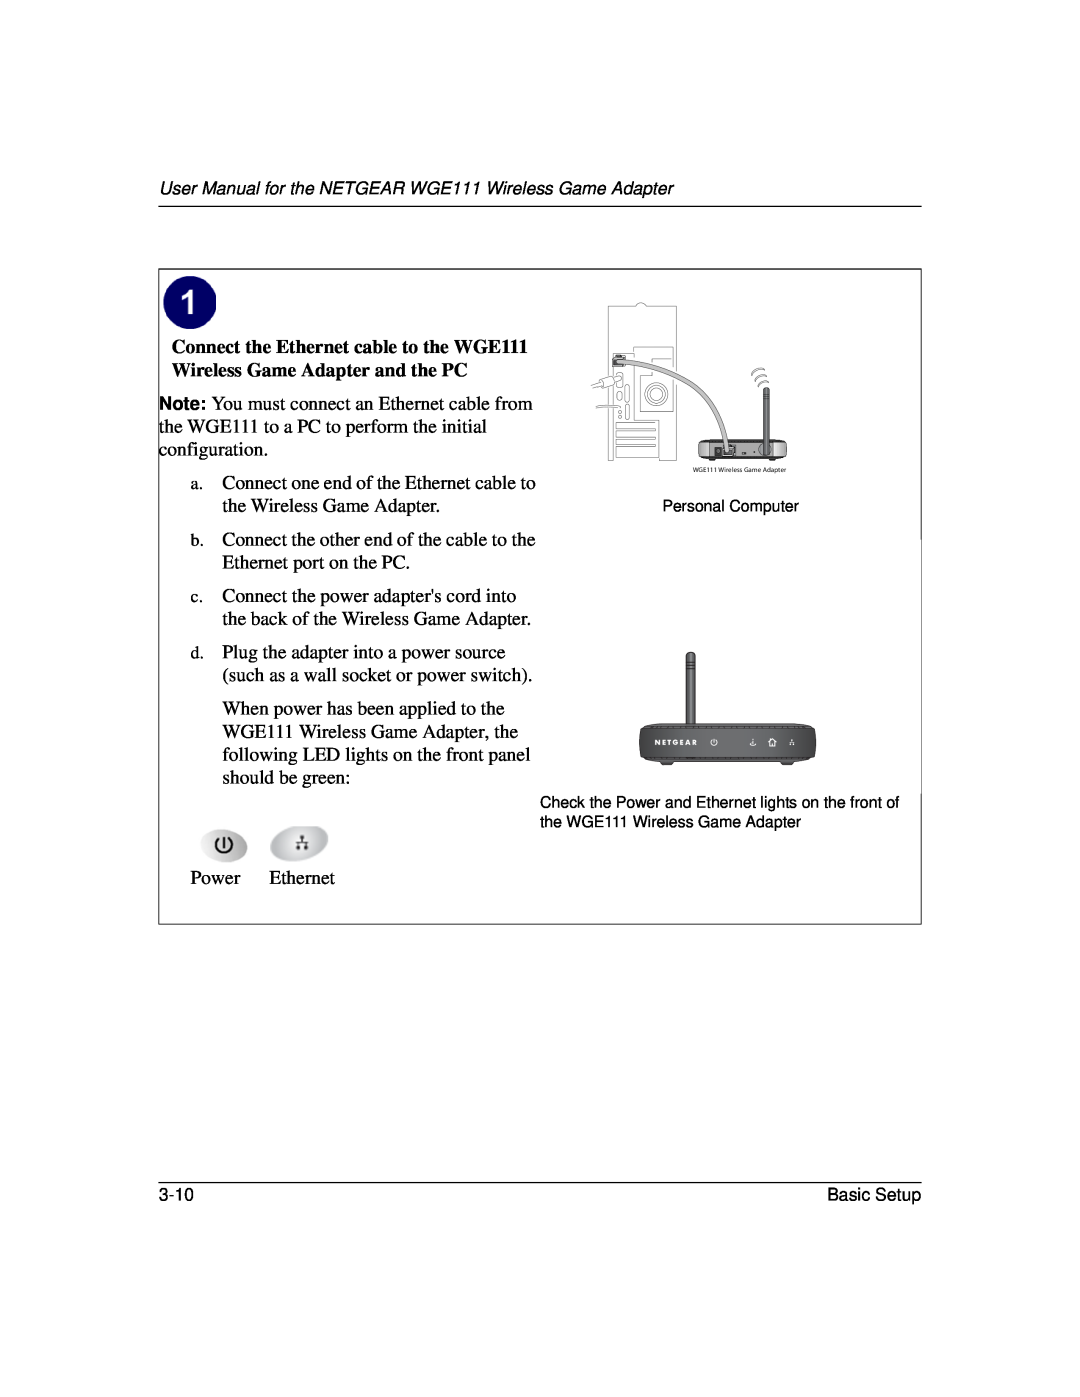 NETGEAR WGE111 user manual a. Connect one end of the Ethernet cable to the Wireless Game Adapter 